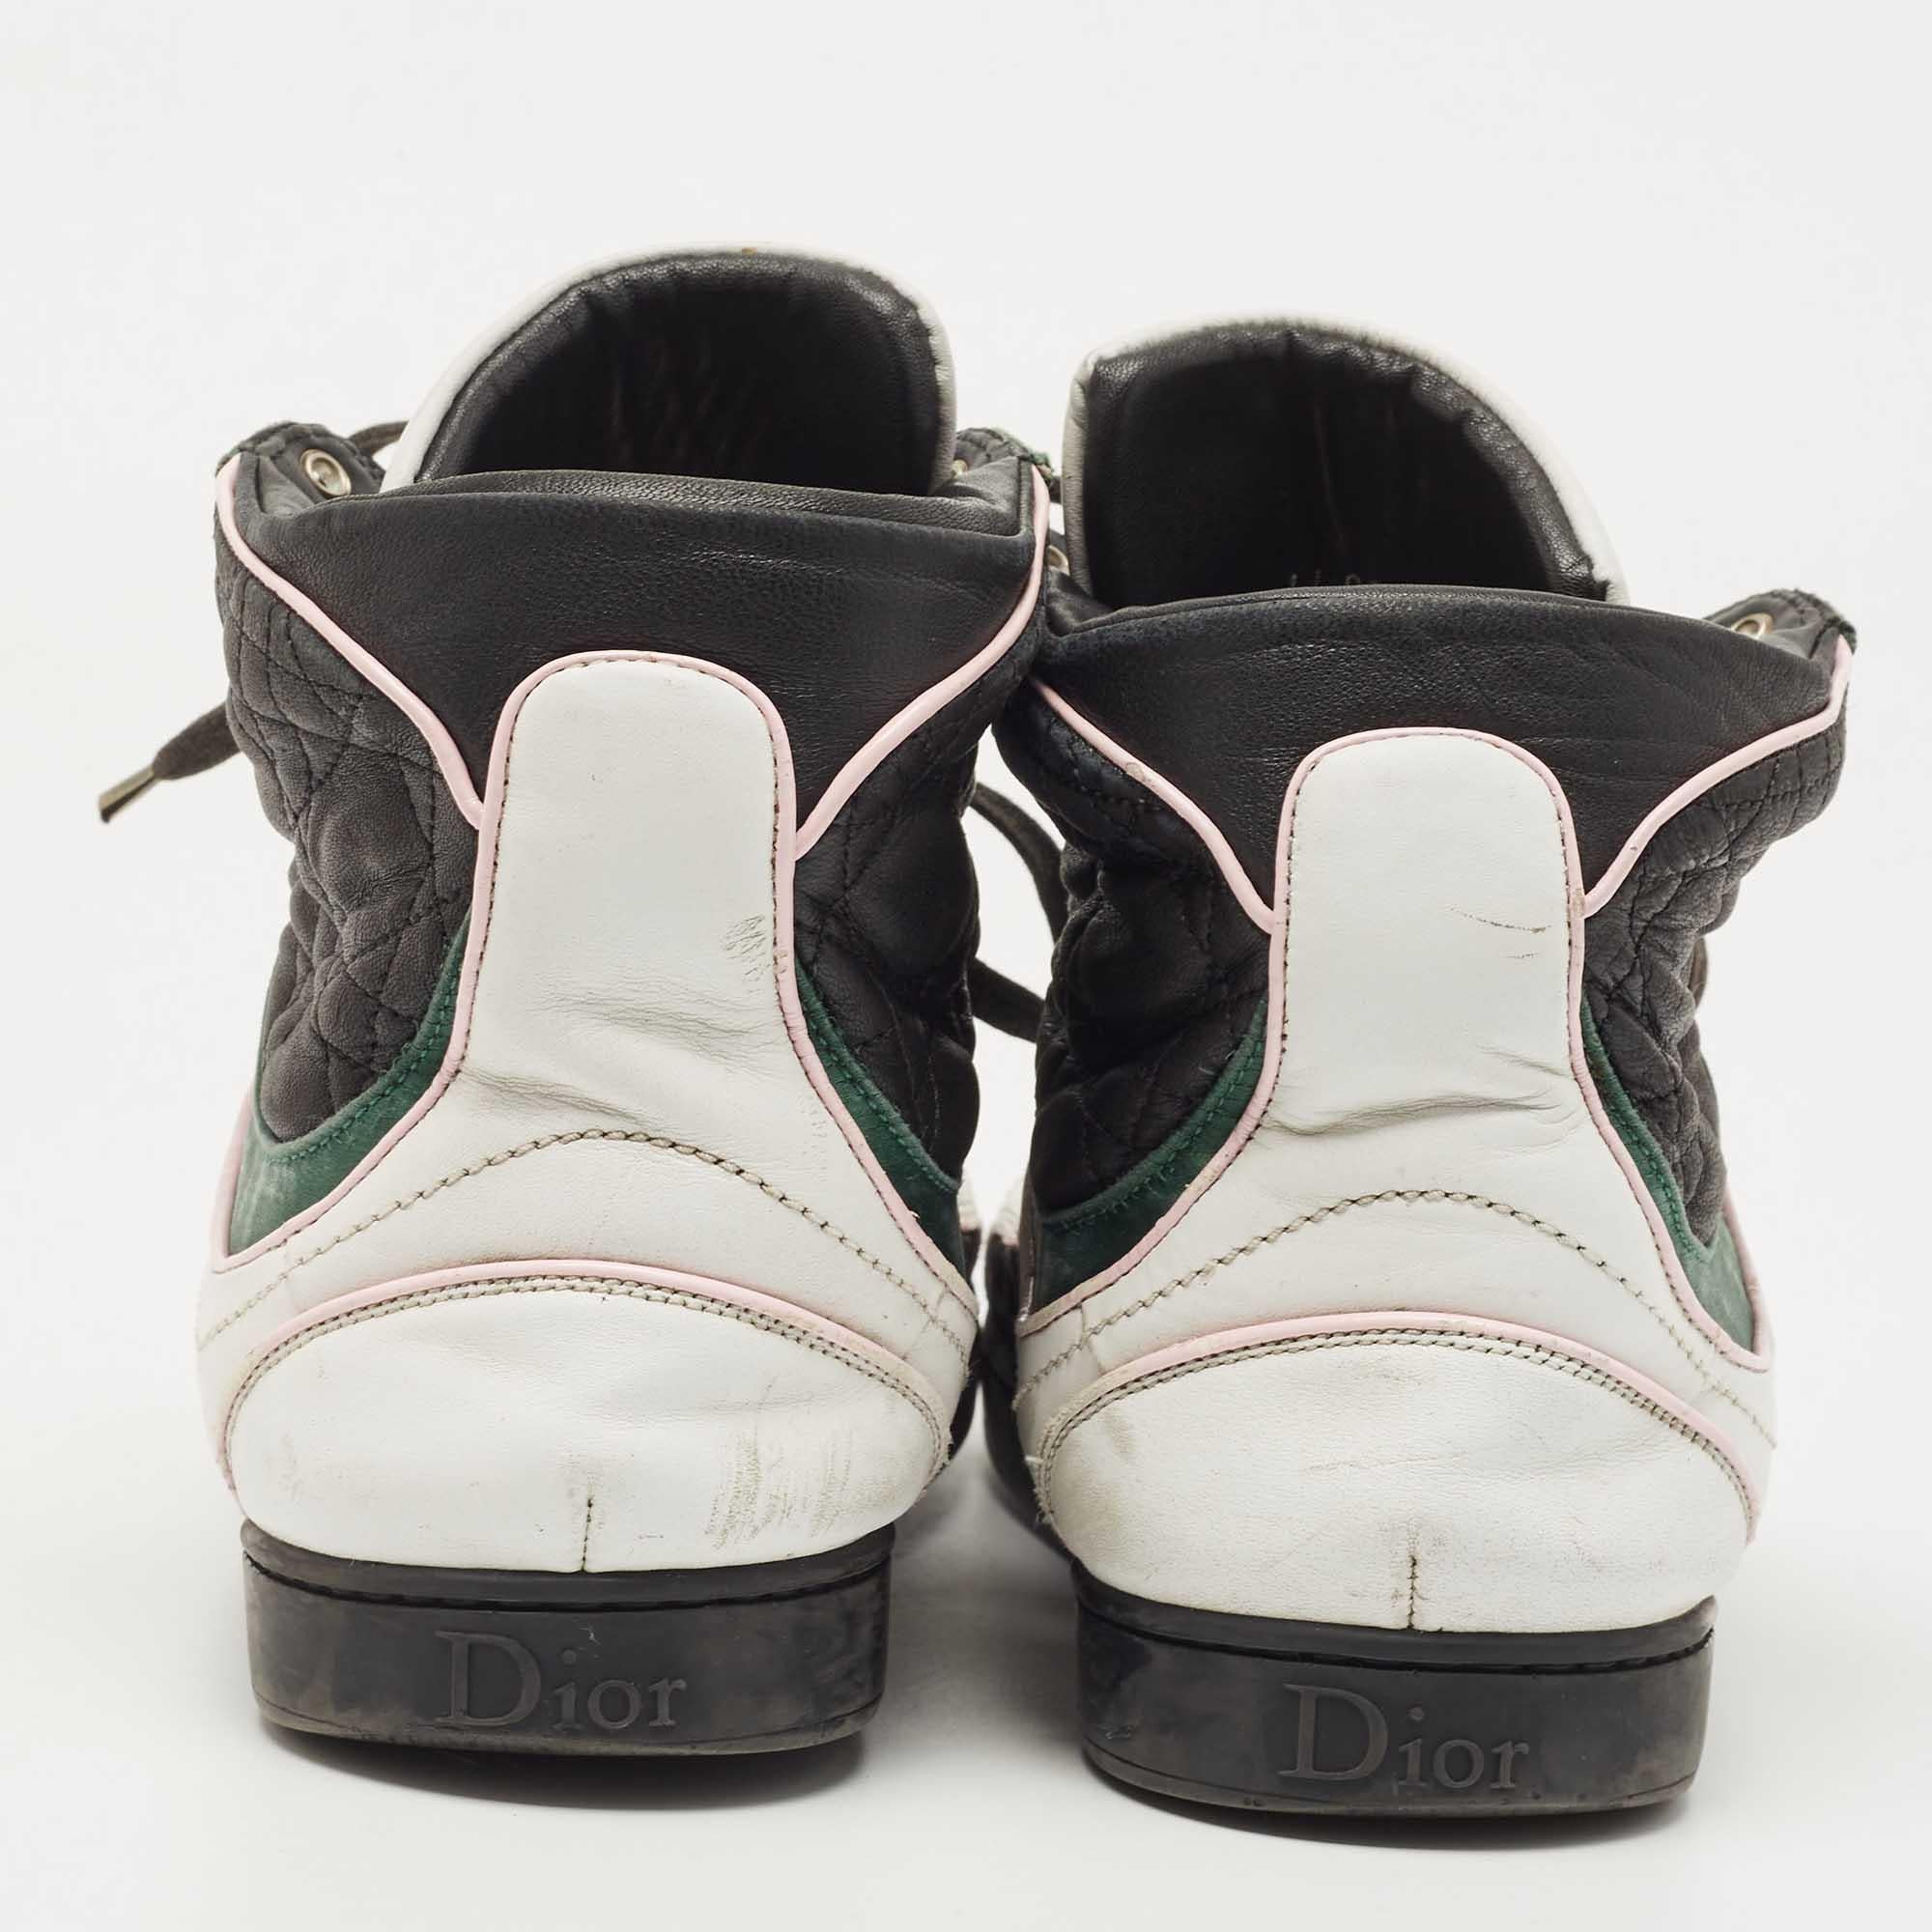 Dior Tricolor Cannage Leather and Satin High Top Sneakers Size 39 1